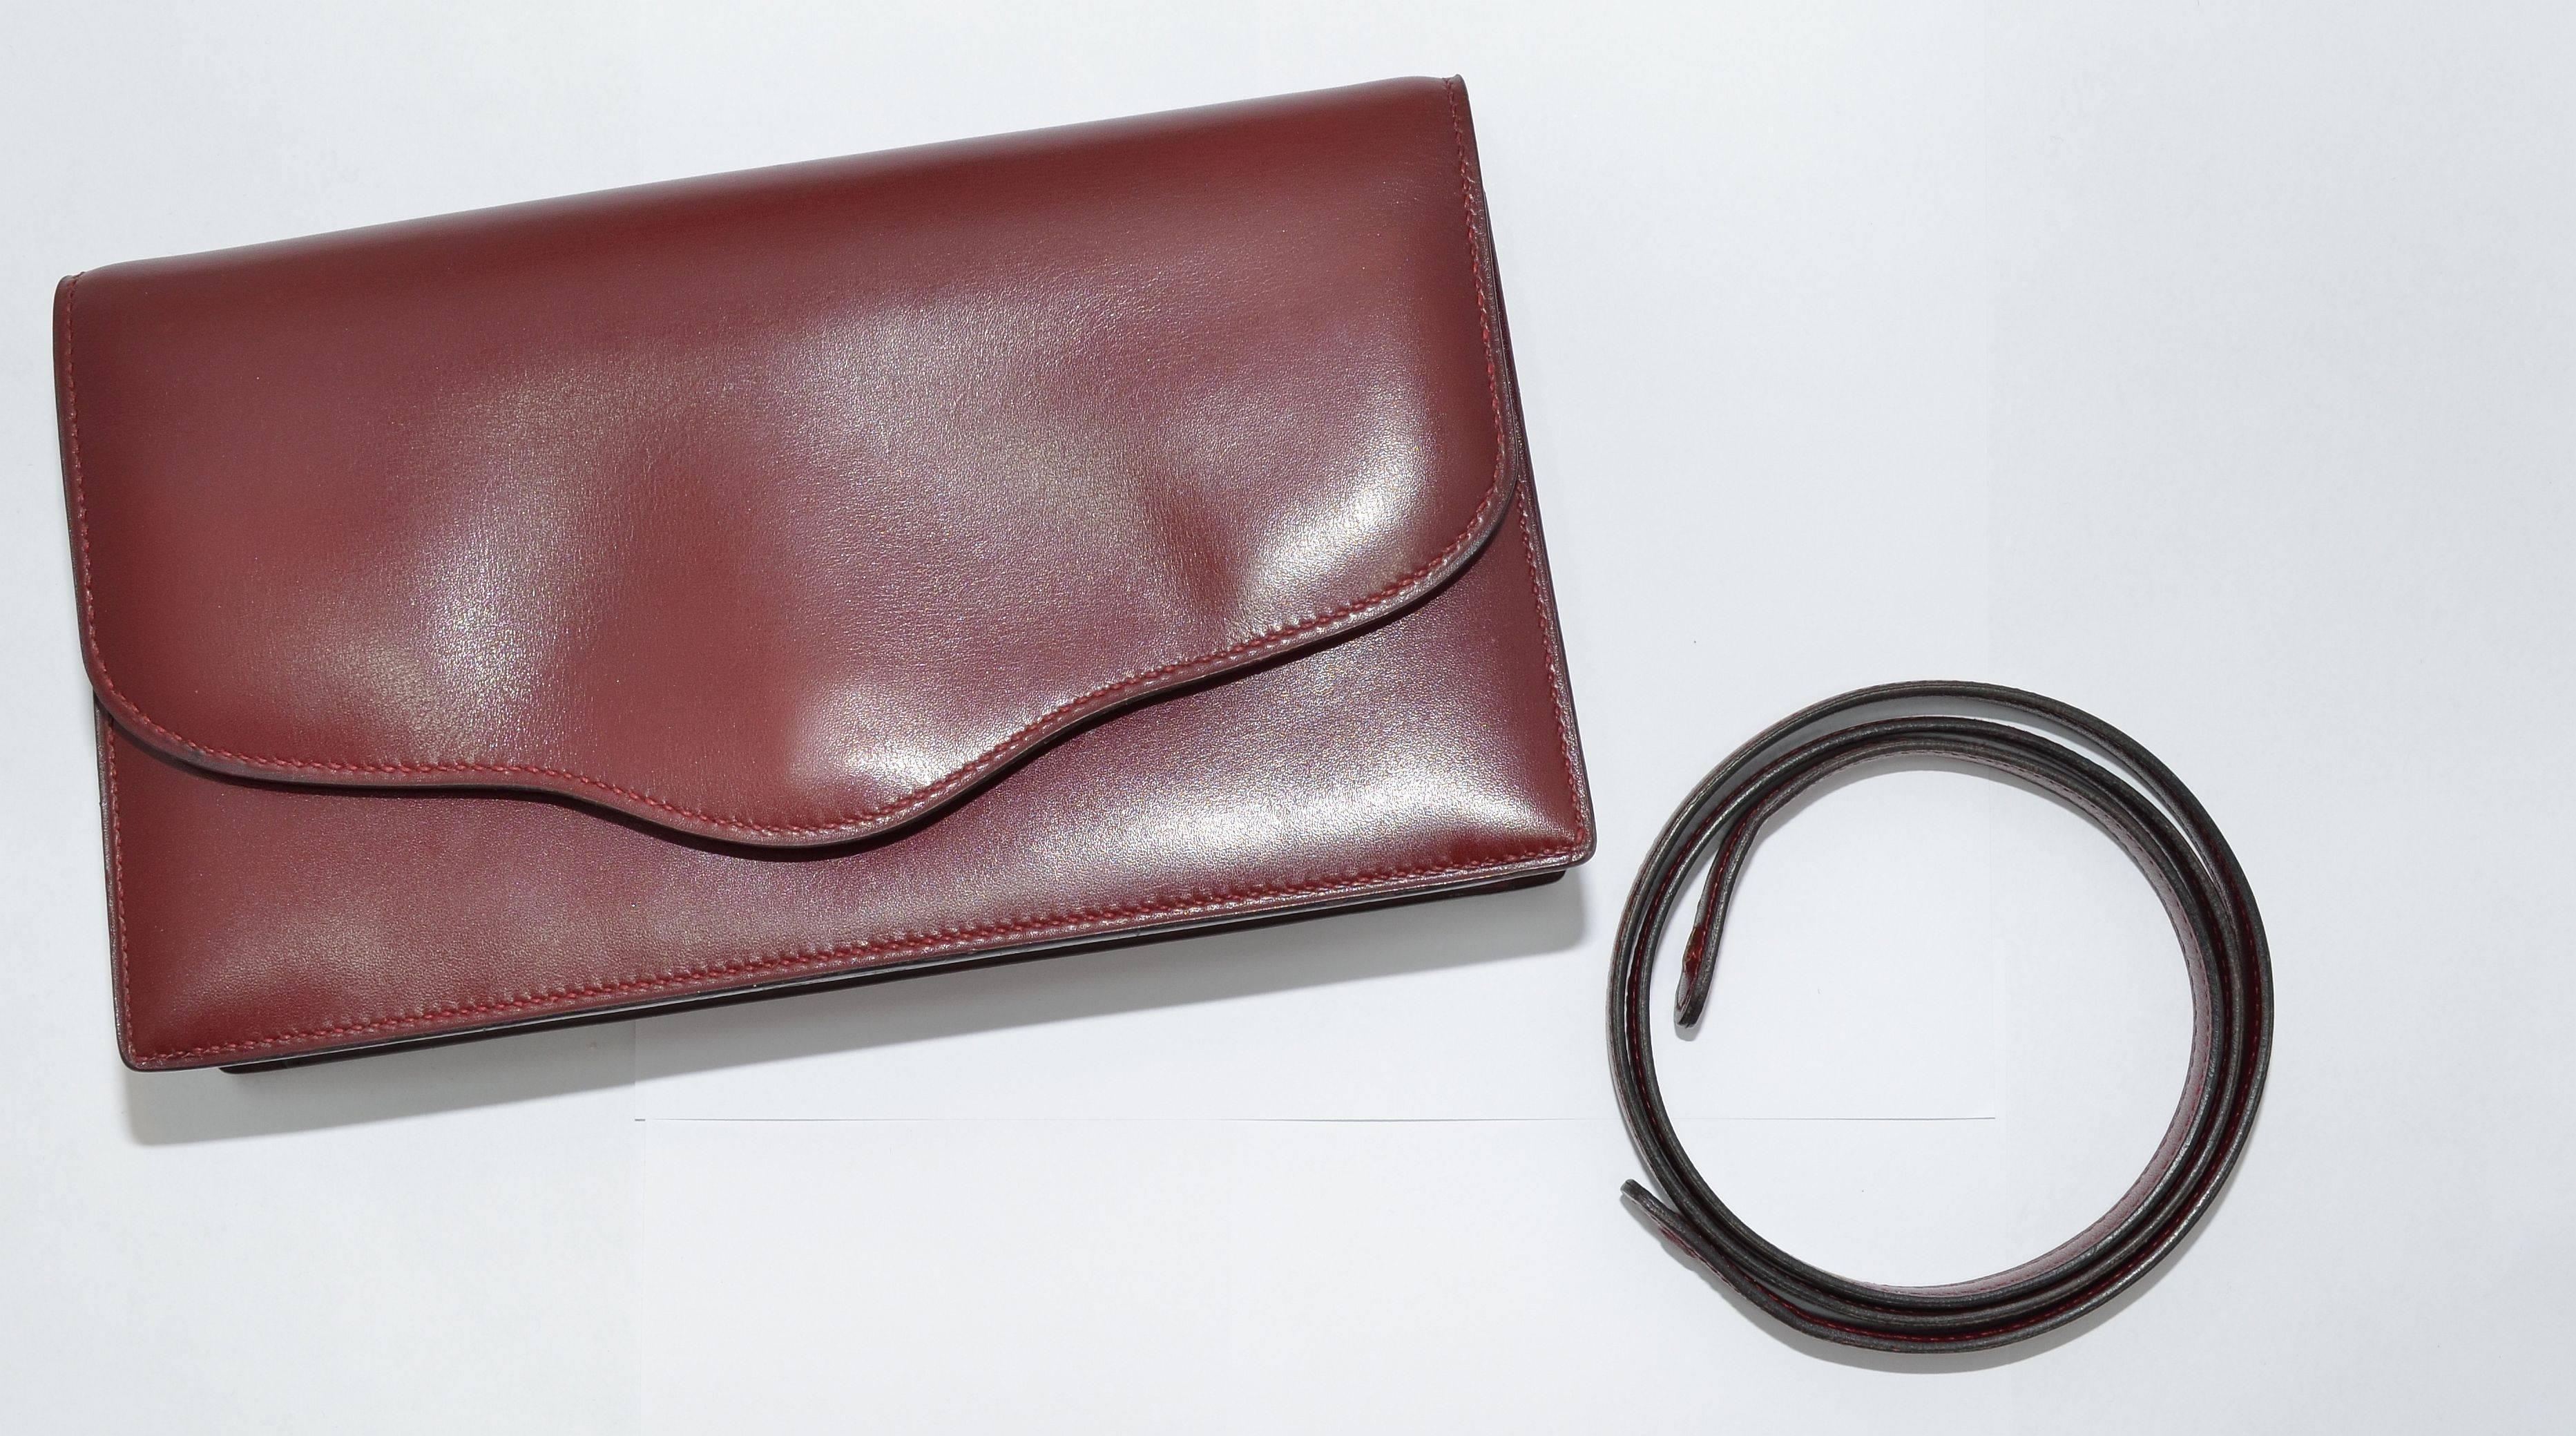 Hermes 2 way clutch was the inspiration for the Constance. Clutch is featured in a deep burgundy box calf leather has a concealed snap closure, and a flat strap for optional ways to wear. Interior is fully lined in leather, one separate compartment,